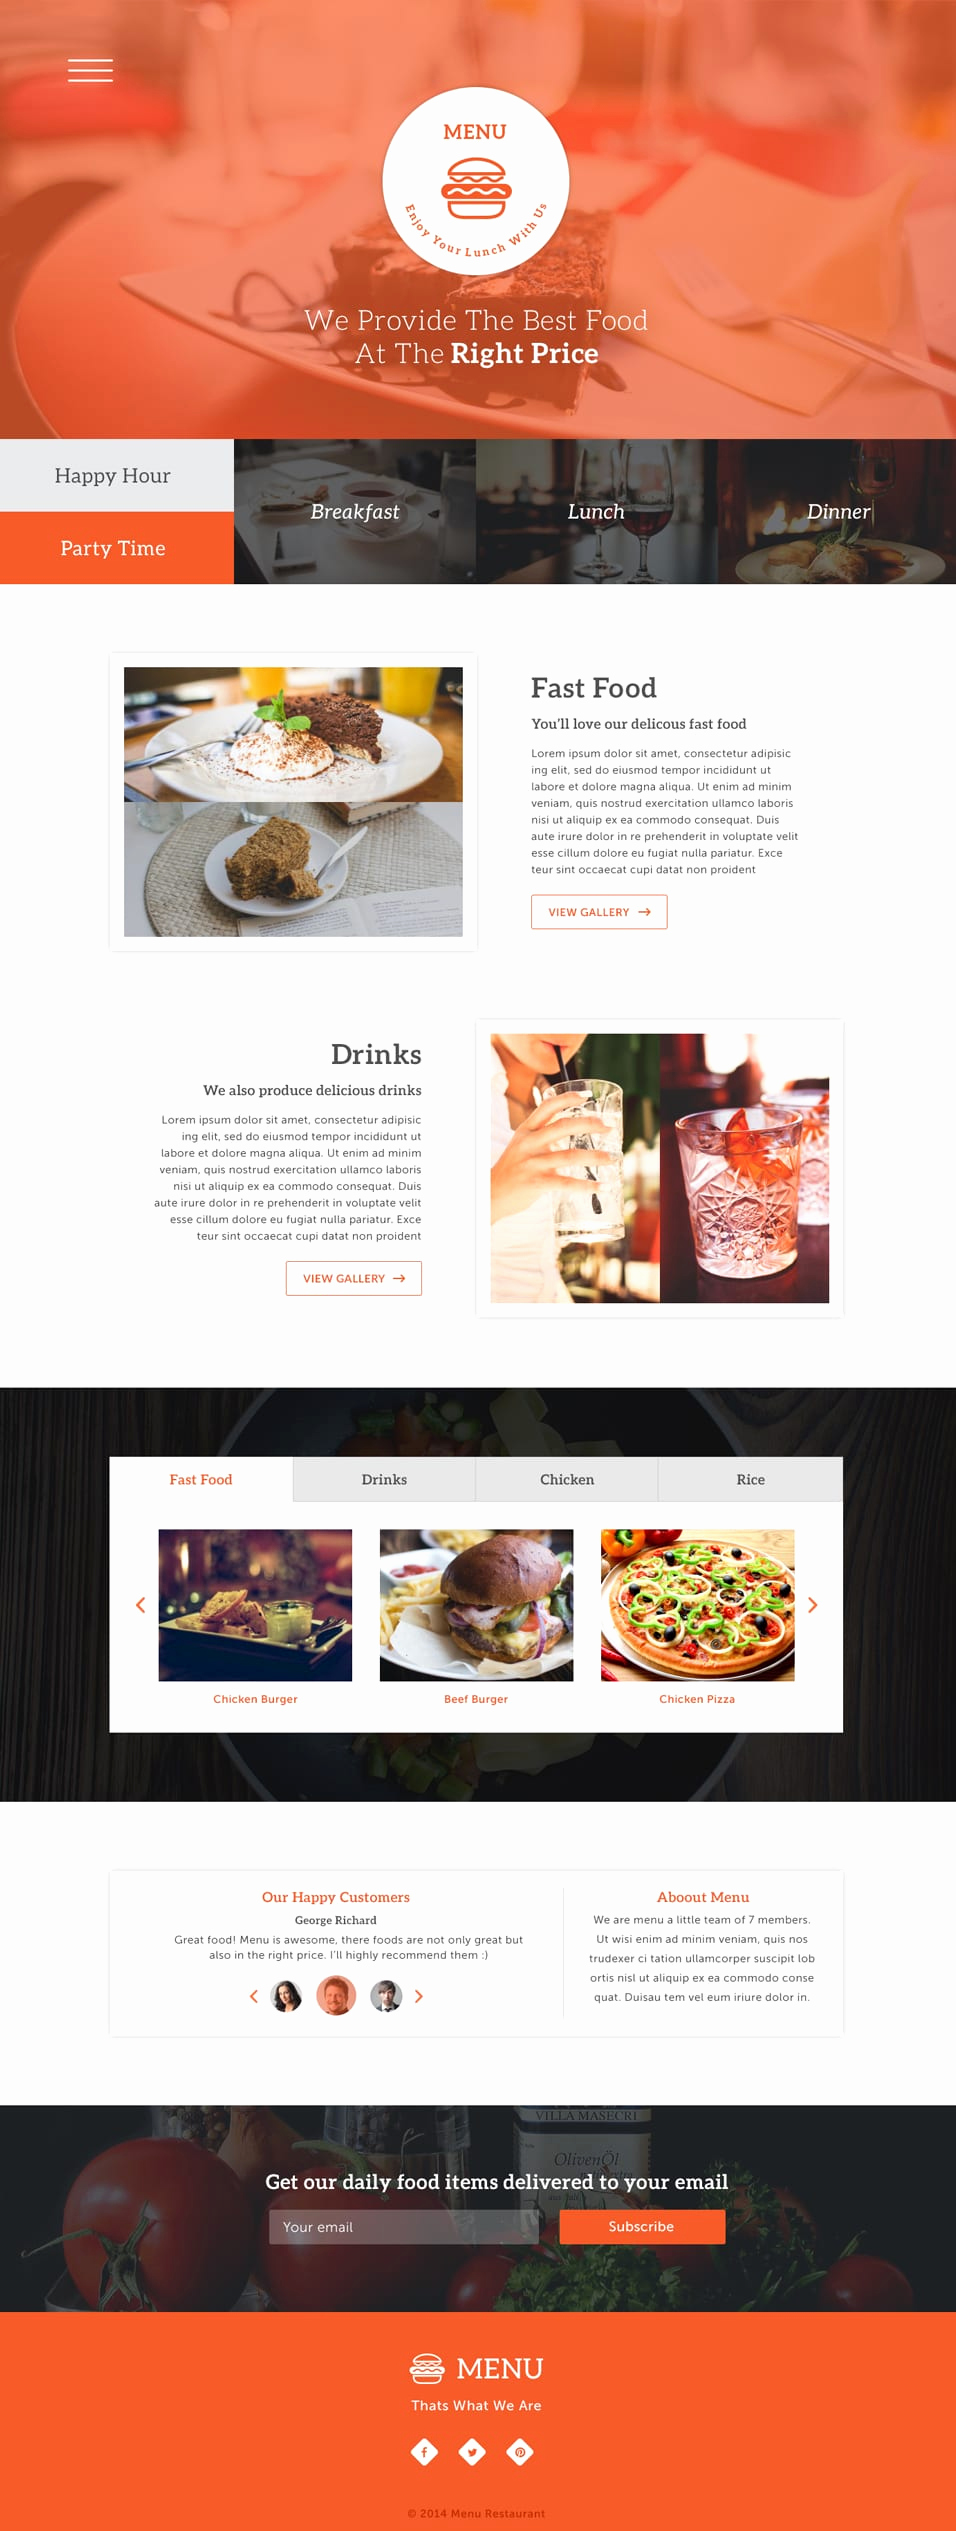 One Page Menu Template Beautiful Latest Free Web Elements From November 2014